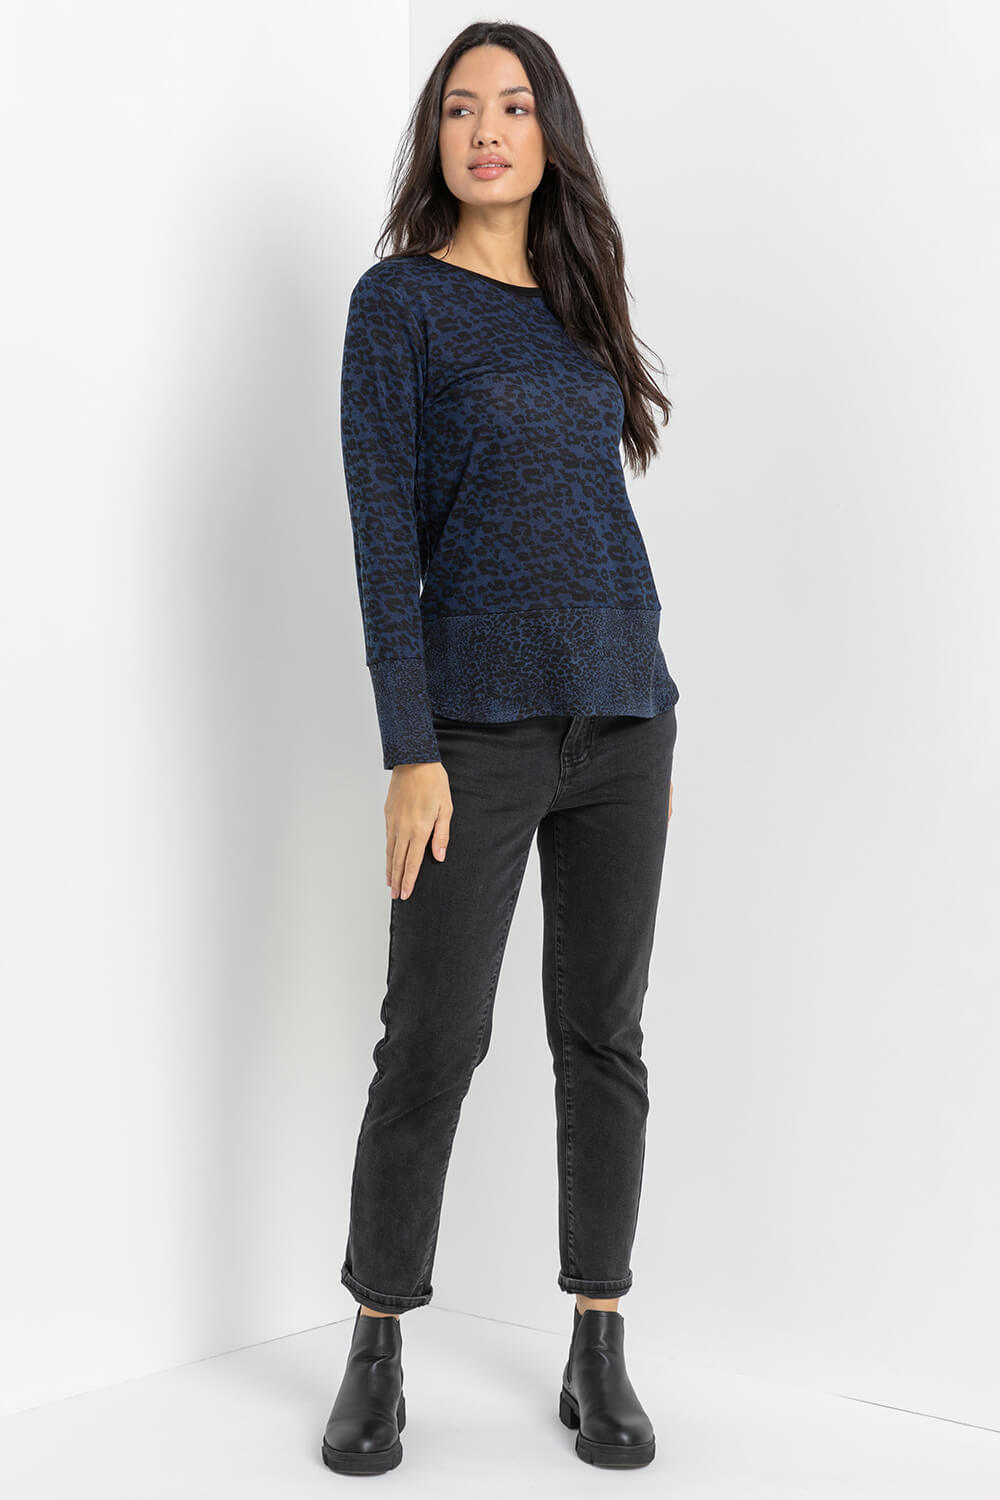 Navy  Leopard Print Round Neck Long Sleeve Jersey Top, Image 2 of 4